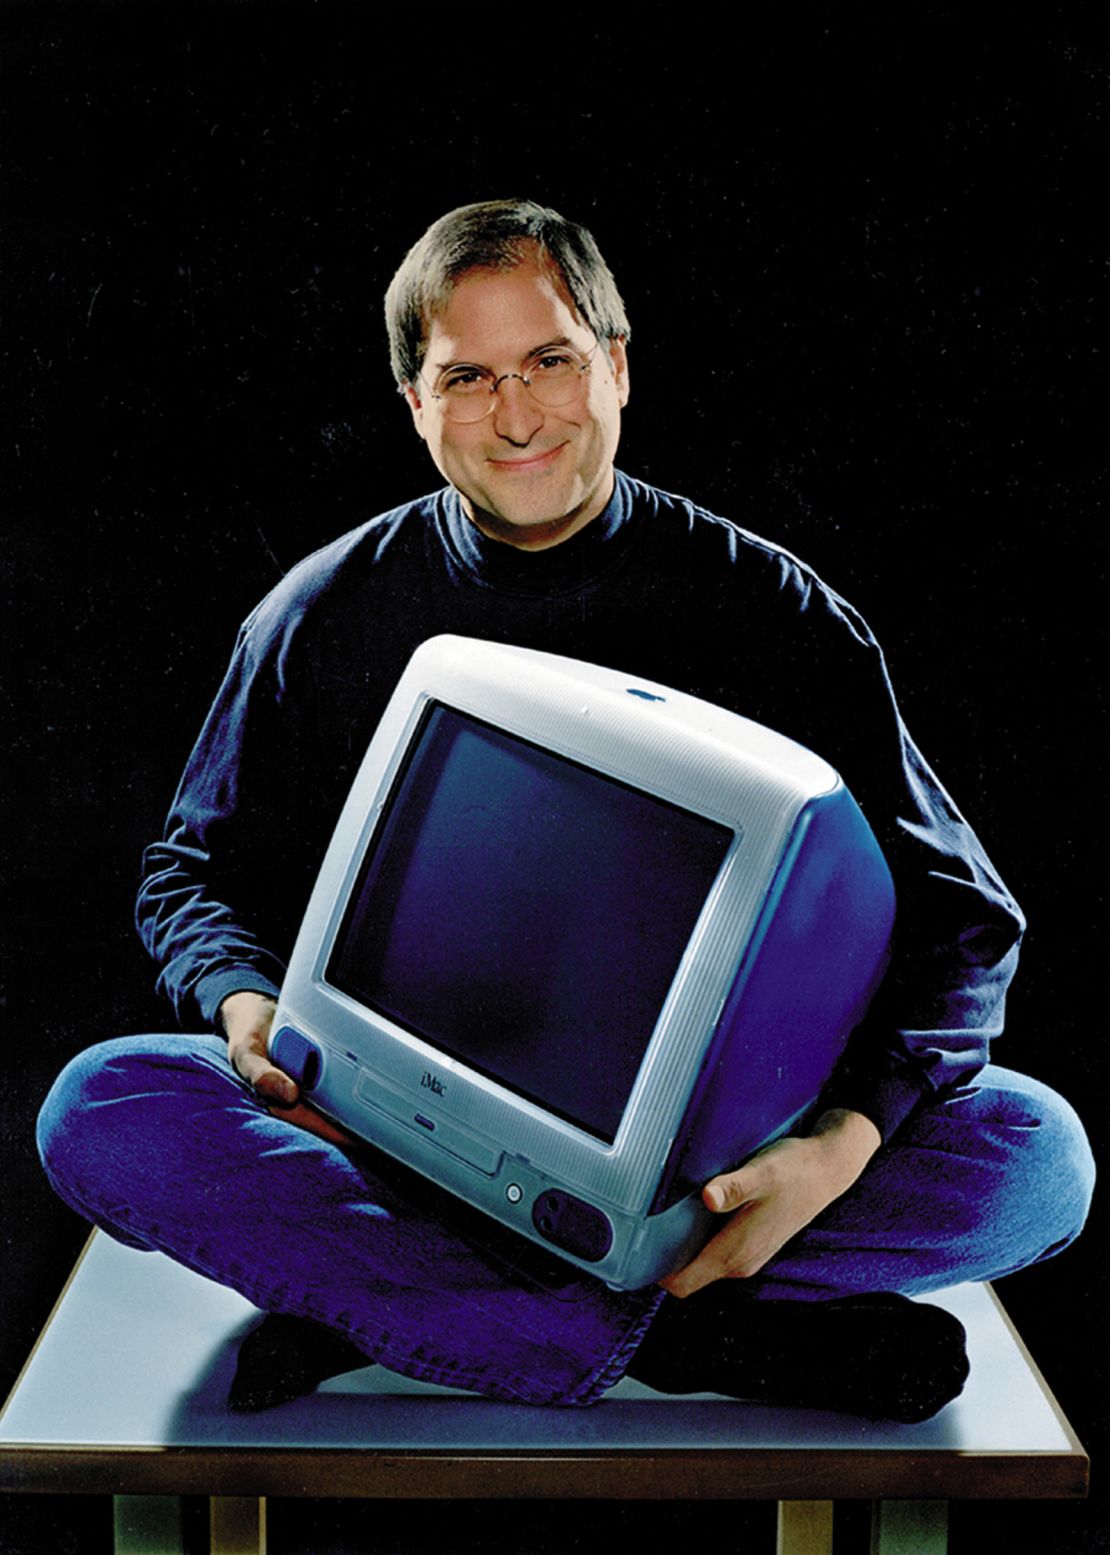 Feb. 19, 1999 - Cupertino, California, U.S. - Apple founder and current chief STEVE JOBS, cross legged and smiling as he holds the iMac that has become the hottest-selling computer on the market. The computer now comes in five fruit-inspired colors including blueberry and strawberry. Shown is the original Bondi Blue color.